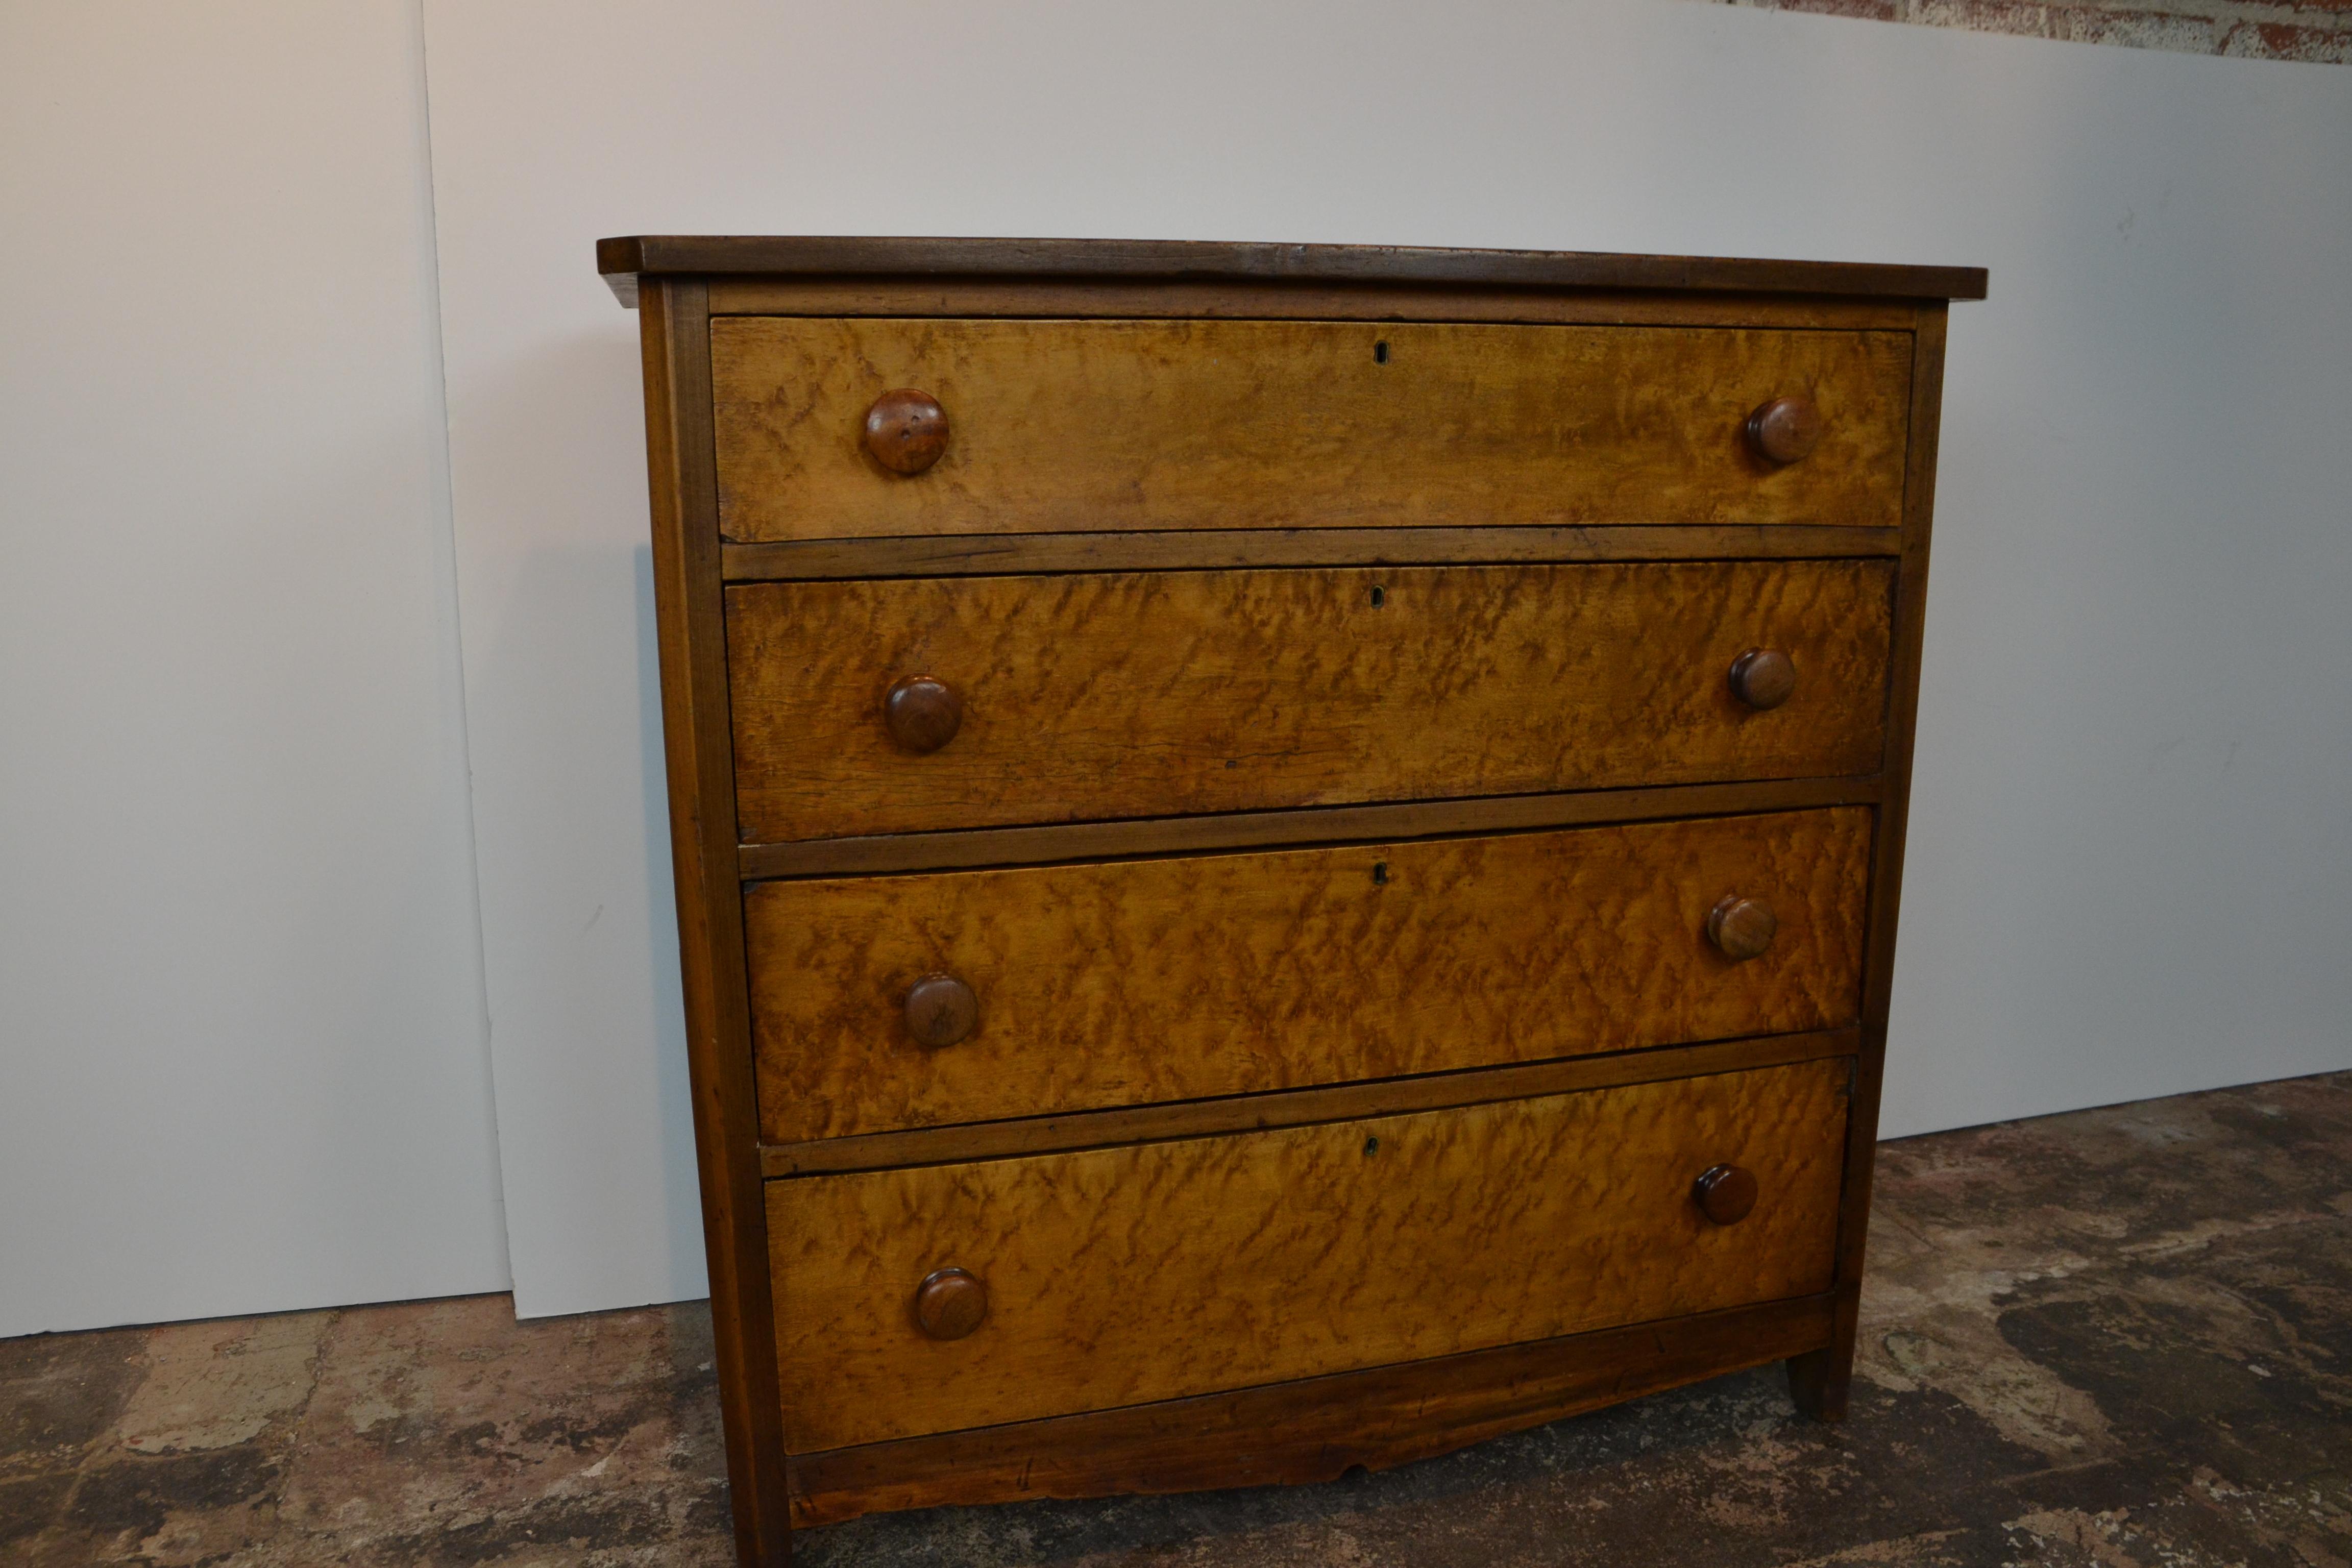 A 19th century chest of 4 drawers in cherrywood with maple drawer fronts.